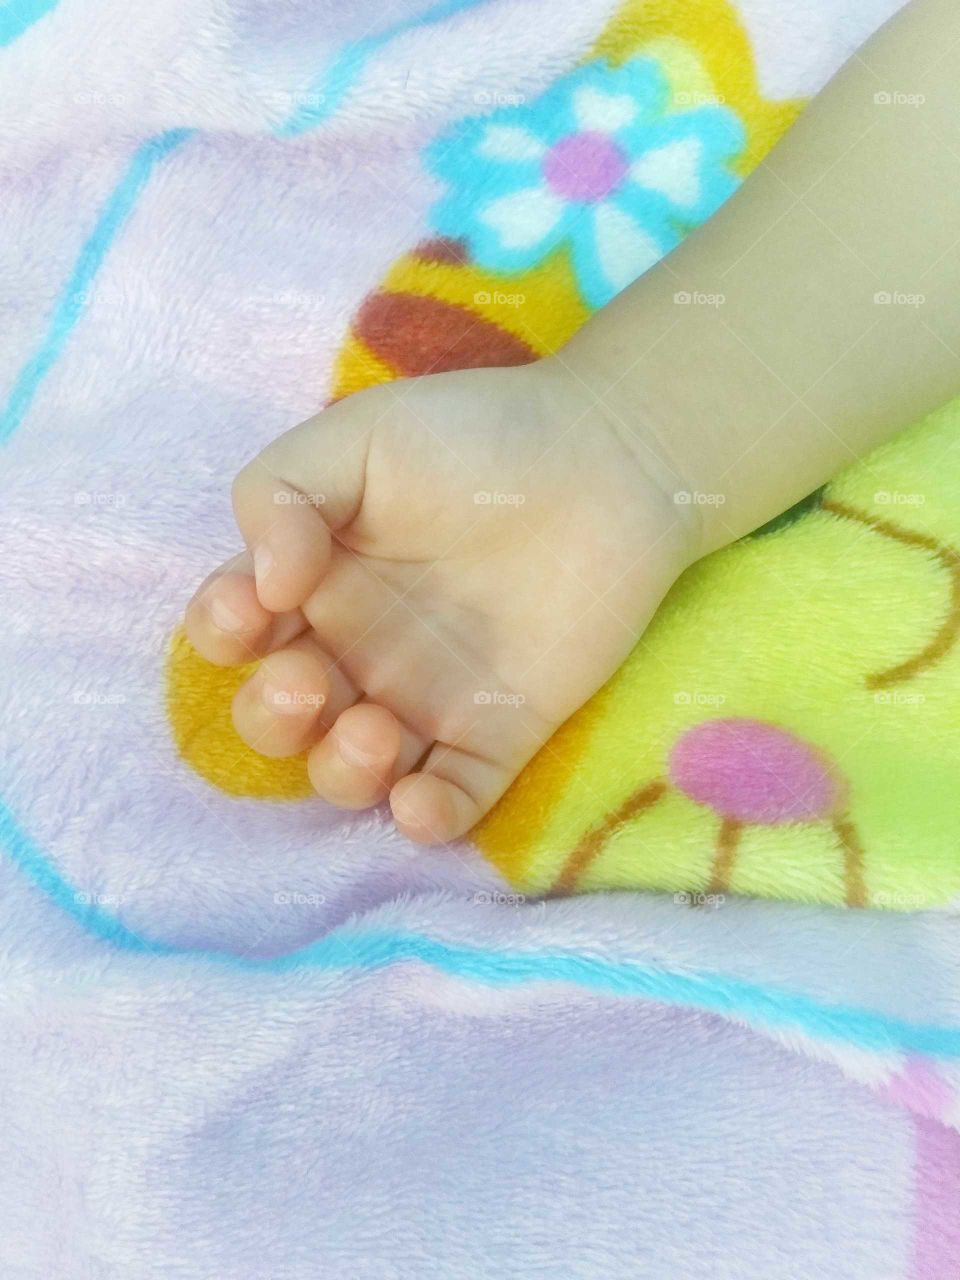 Hand of baby opened while sleeping deeply.